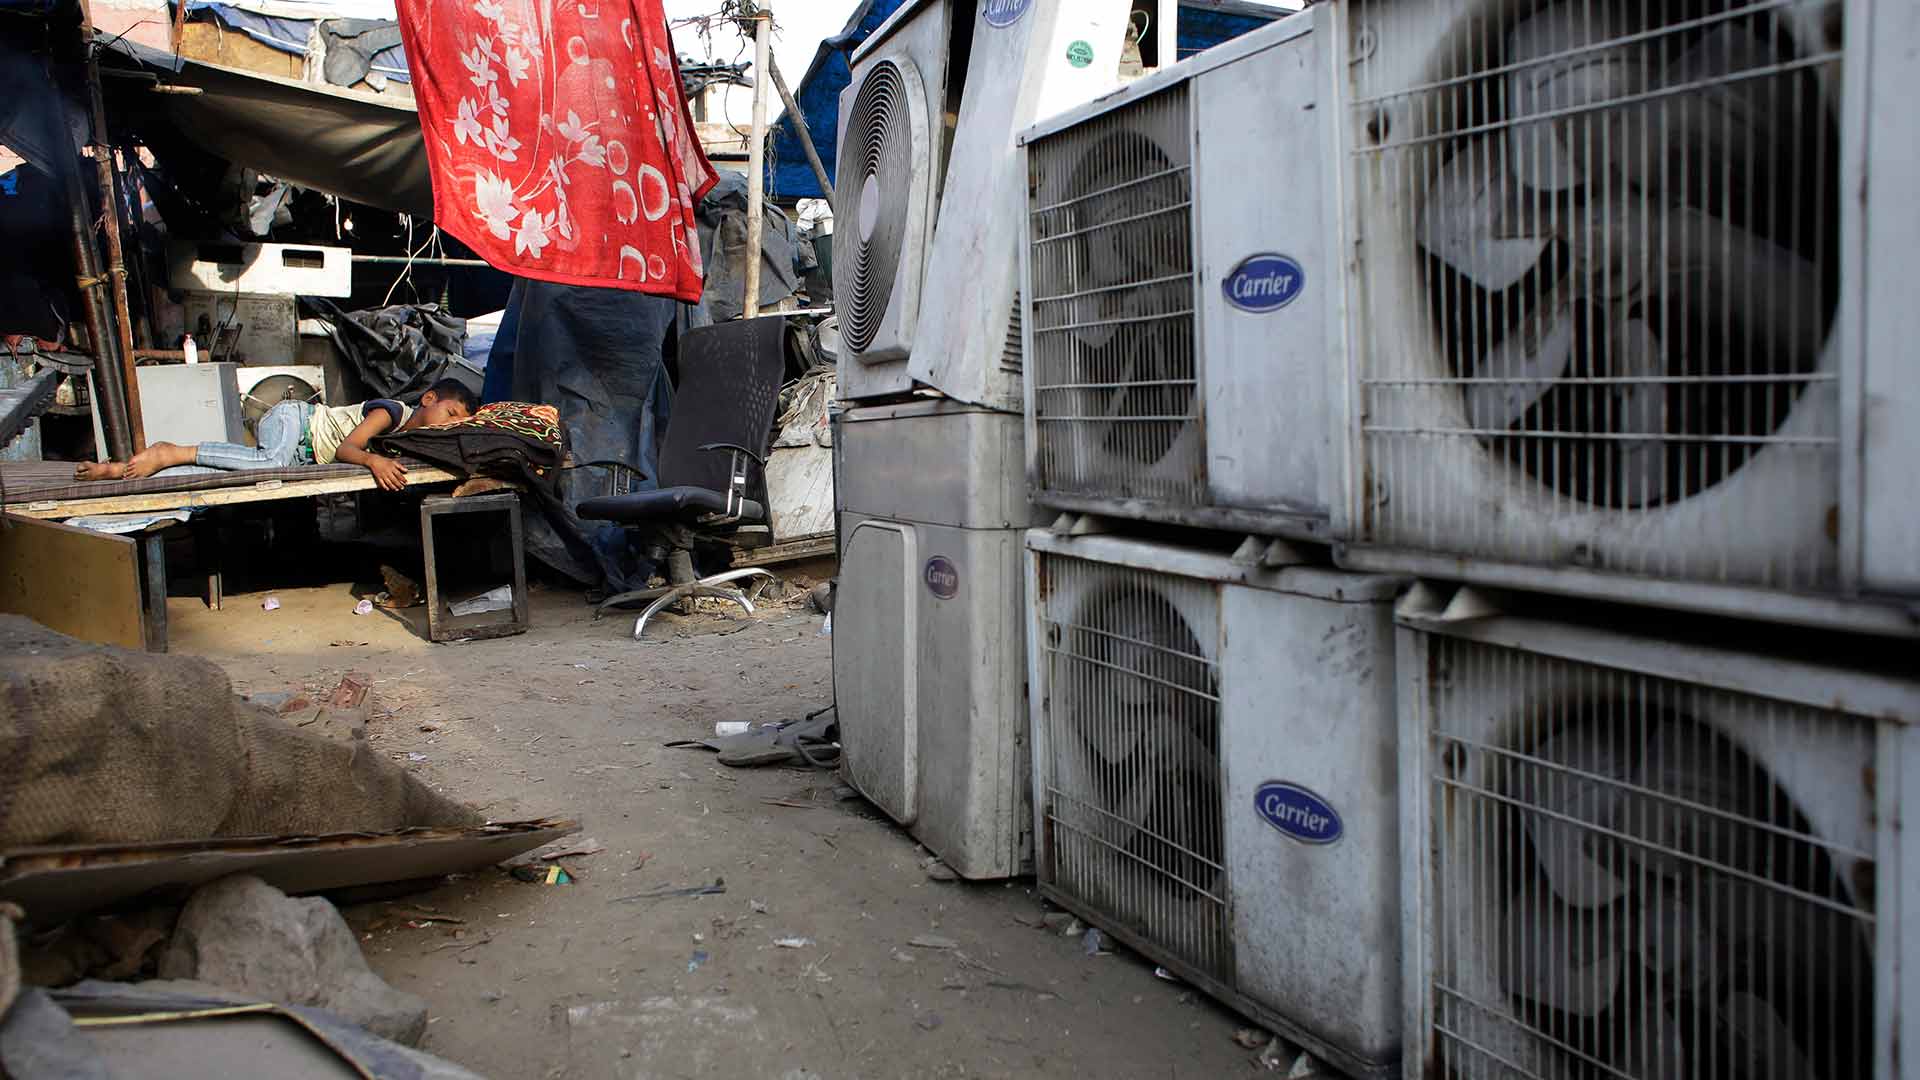 In this Tuesday, May 17, 2016 file photo, an Indian boy of a migrant daily wageworker sleeps in scorching summer temperatures near an air conditioner shop at a marketplace in New Delhi, India. Nations reached a deal Saturday, Oct. 15, 2016 to limit the use of hydrofluorocarbons, or HFCs - greenhouse gases far more powerful than carbon dioxide that are used in air conditioners and refrigerators, in a major effort to fight climate change. (AP Photo/Altaf Qadri, File)